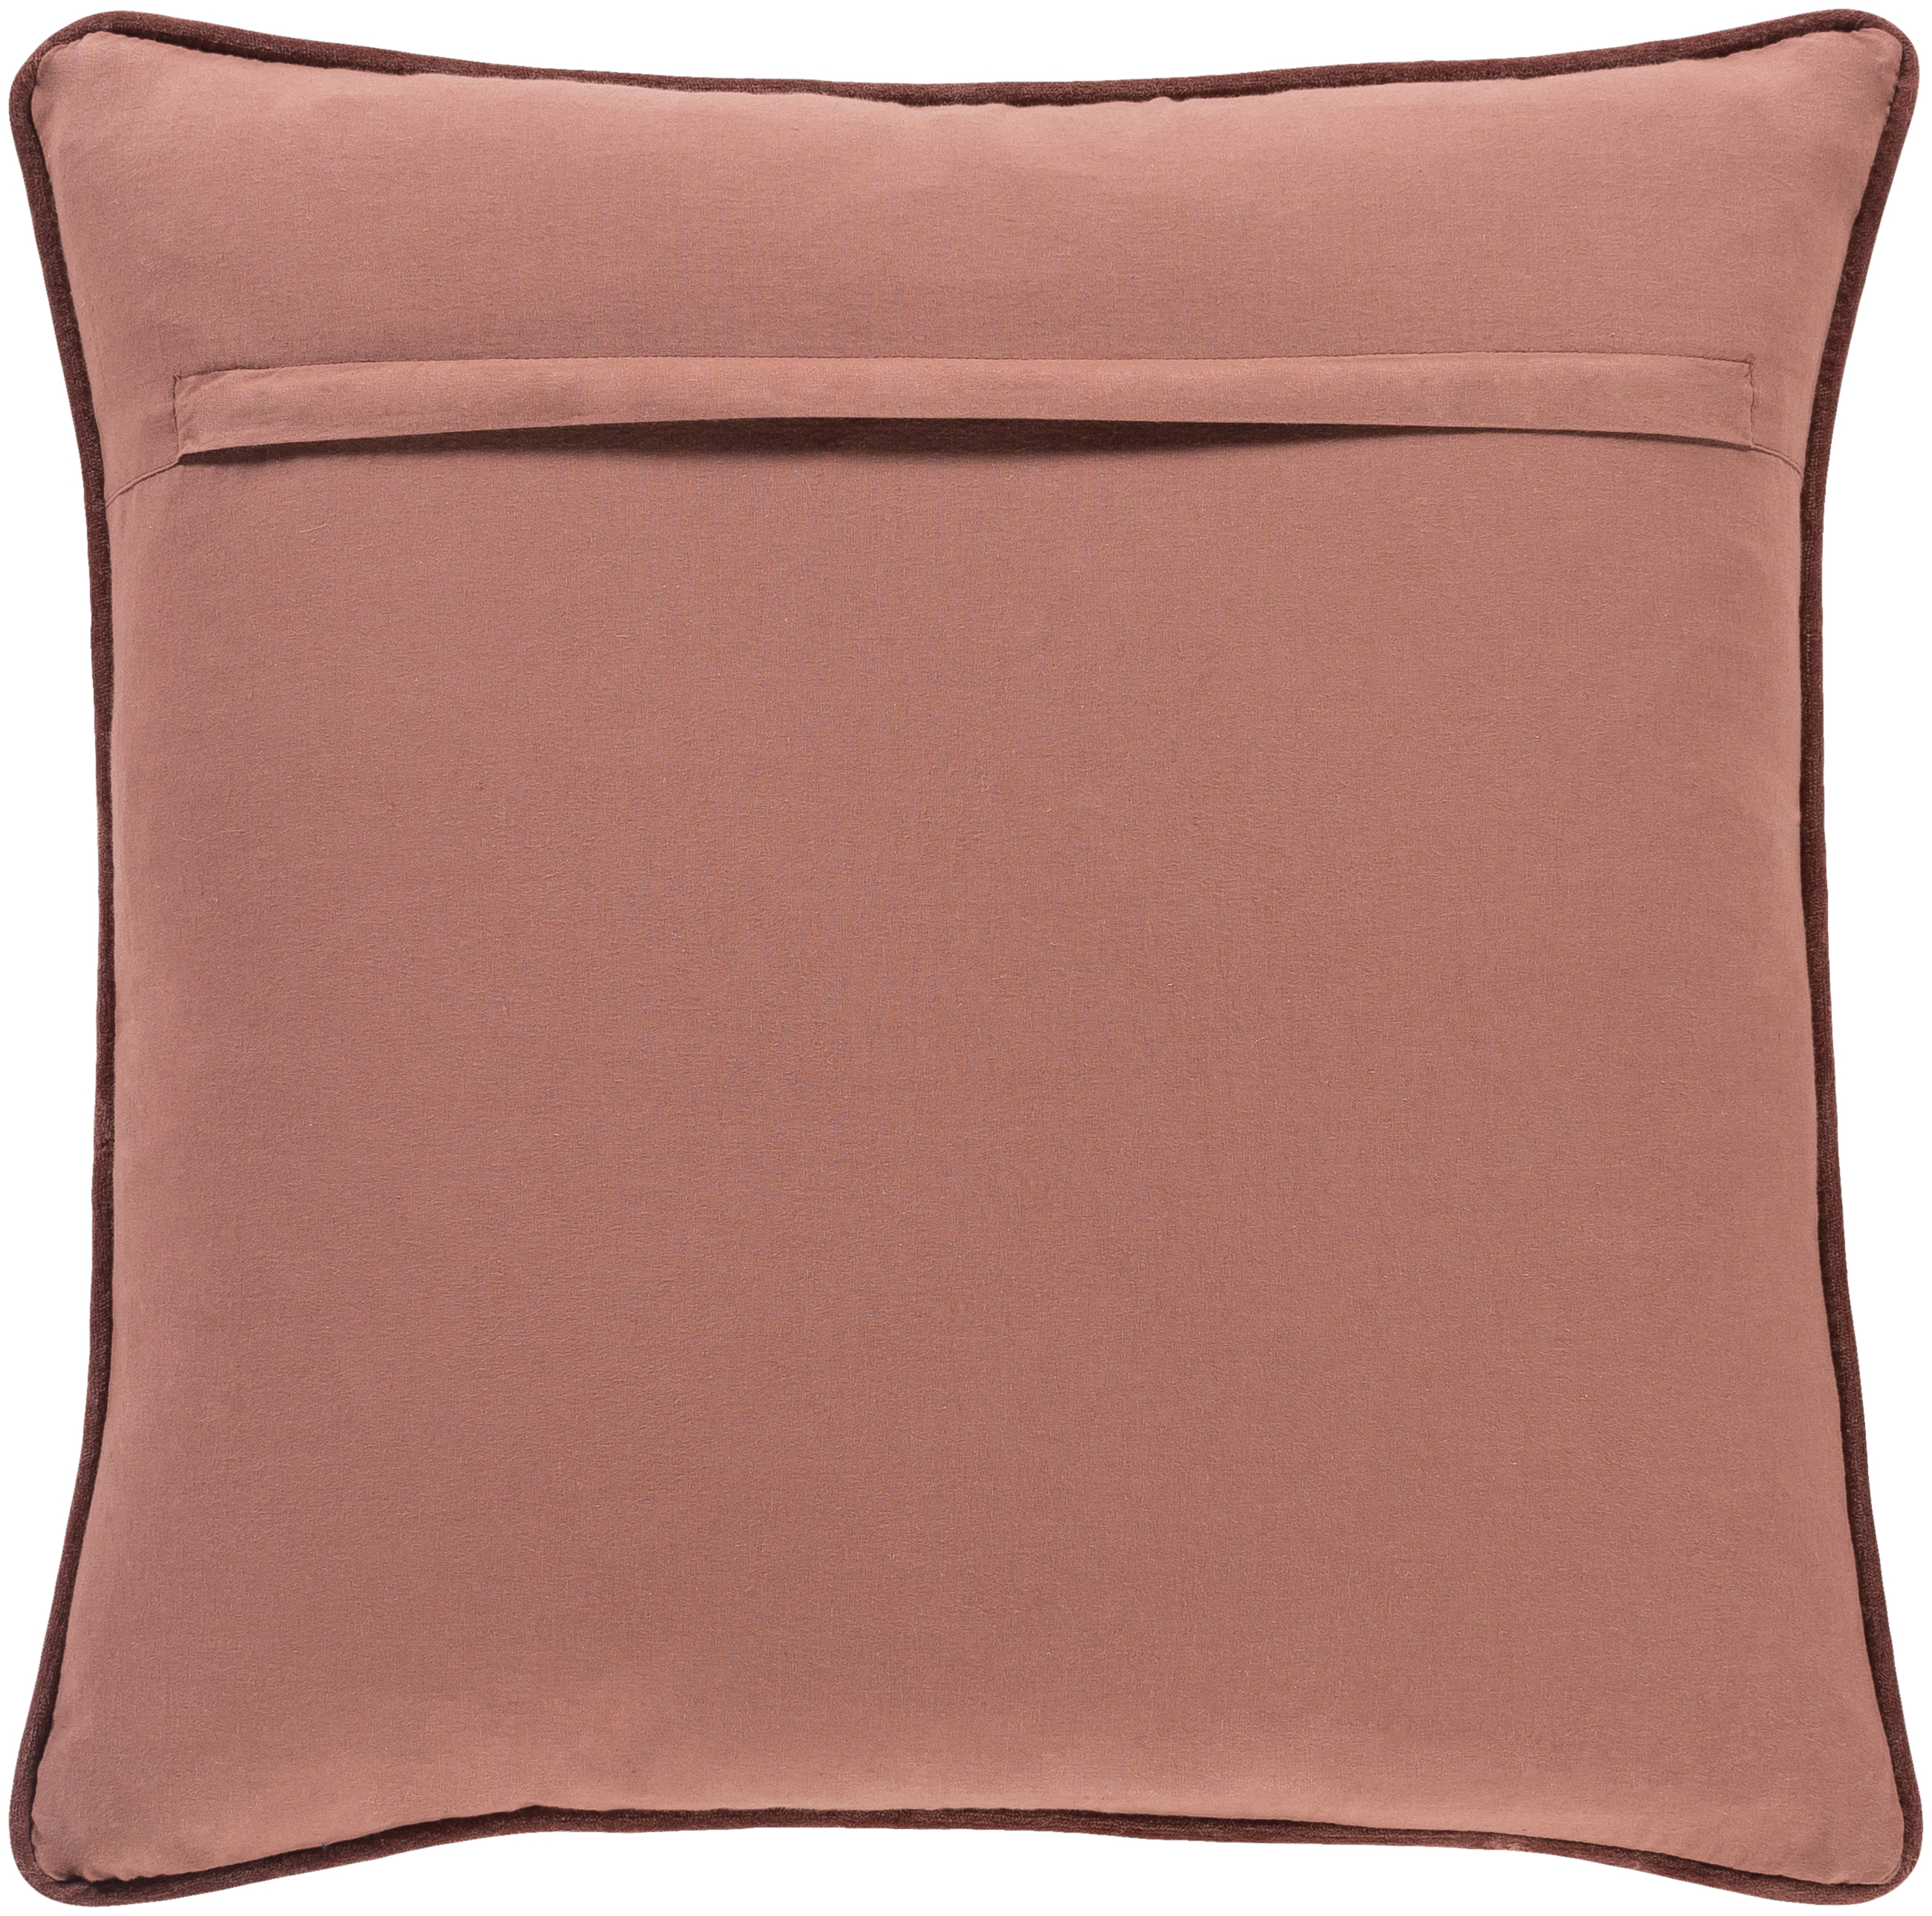 Quilted Cotton Velvet Throw Pillow, 18" x 18", with poly insert - Image 2